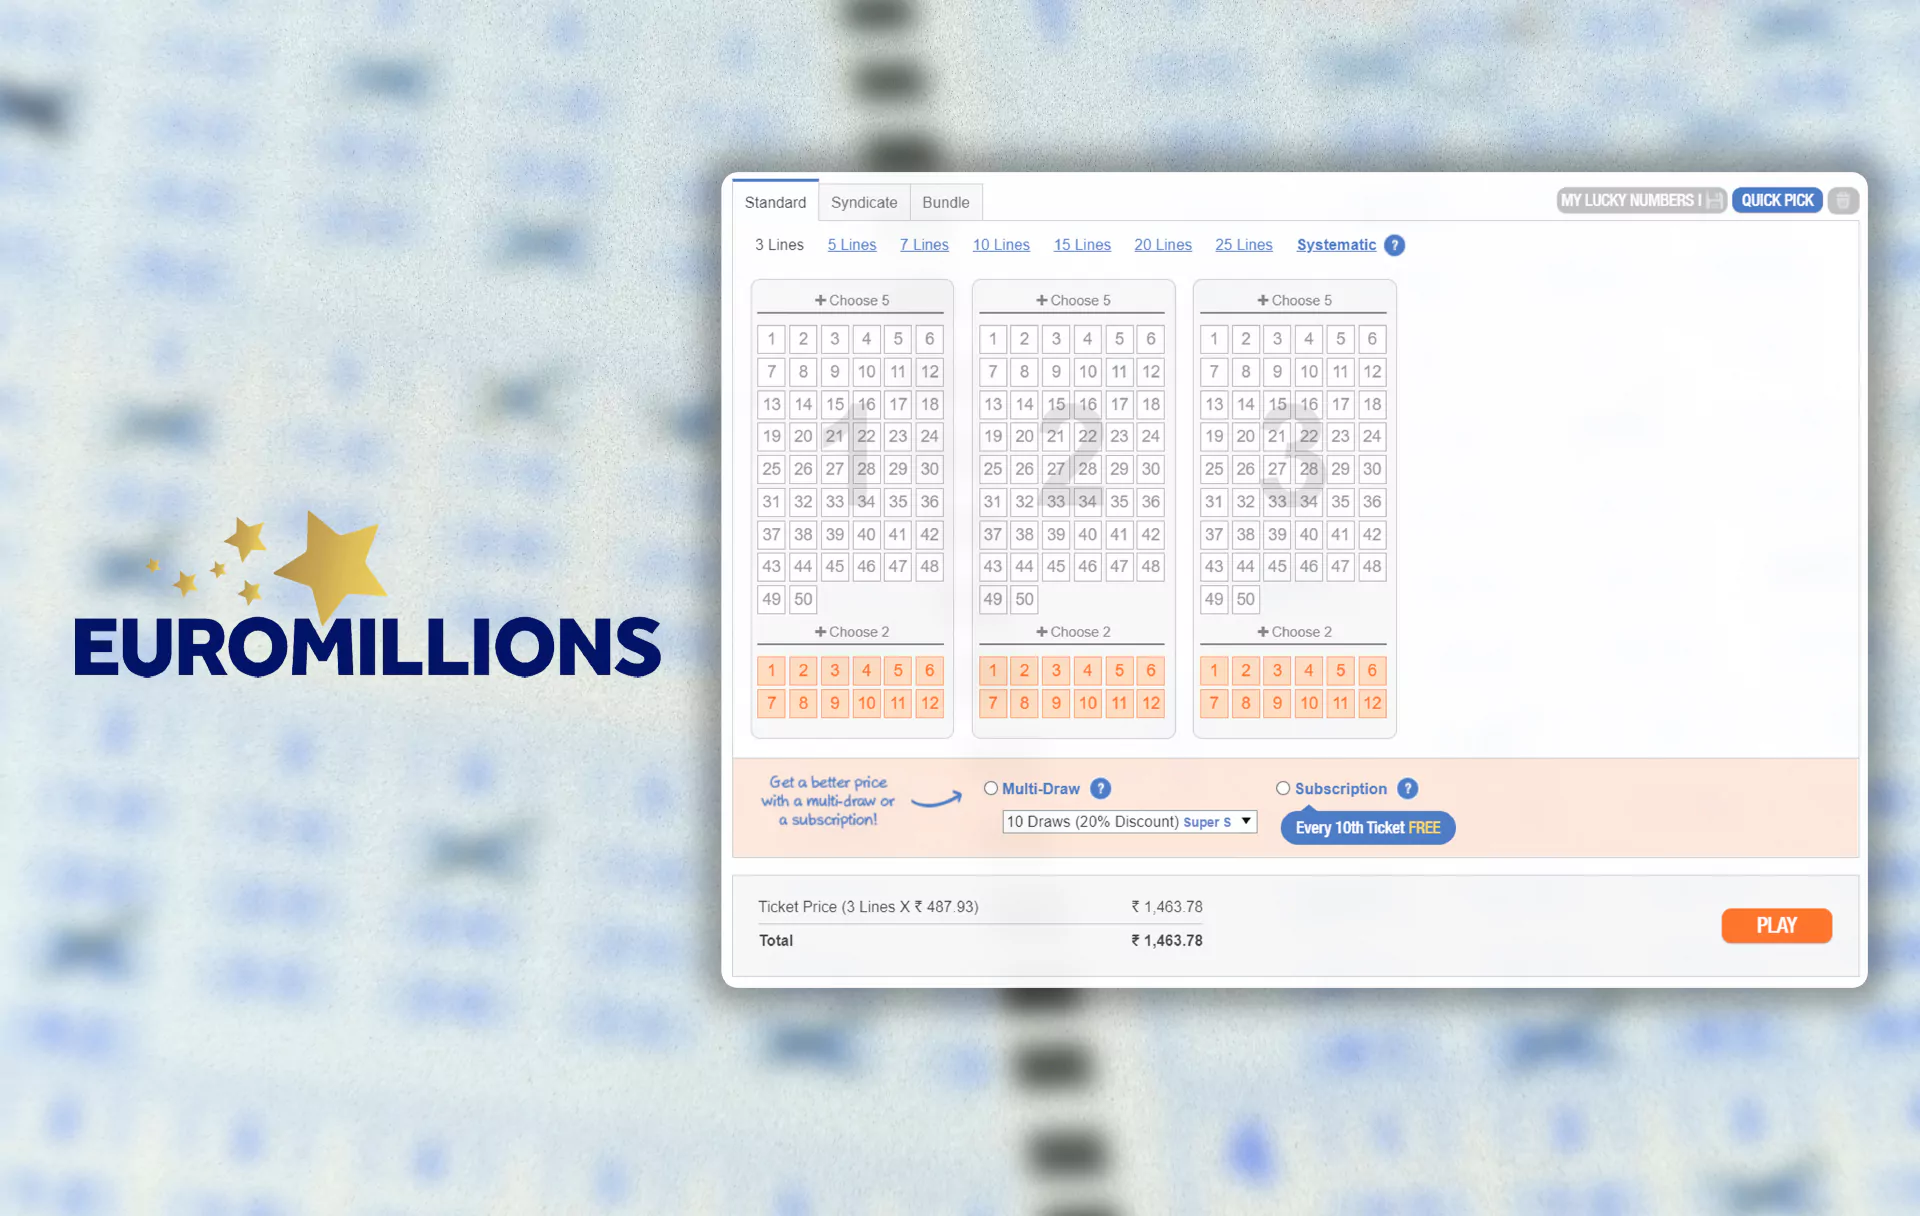 EuroMillions is another European popular lottery with a huge jackpot.